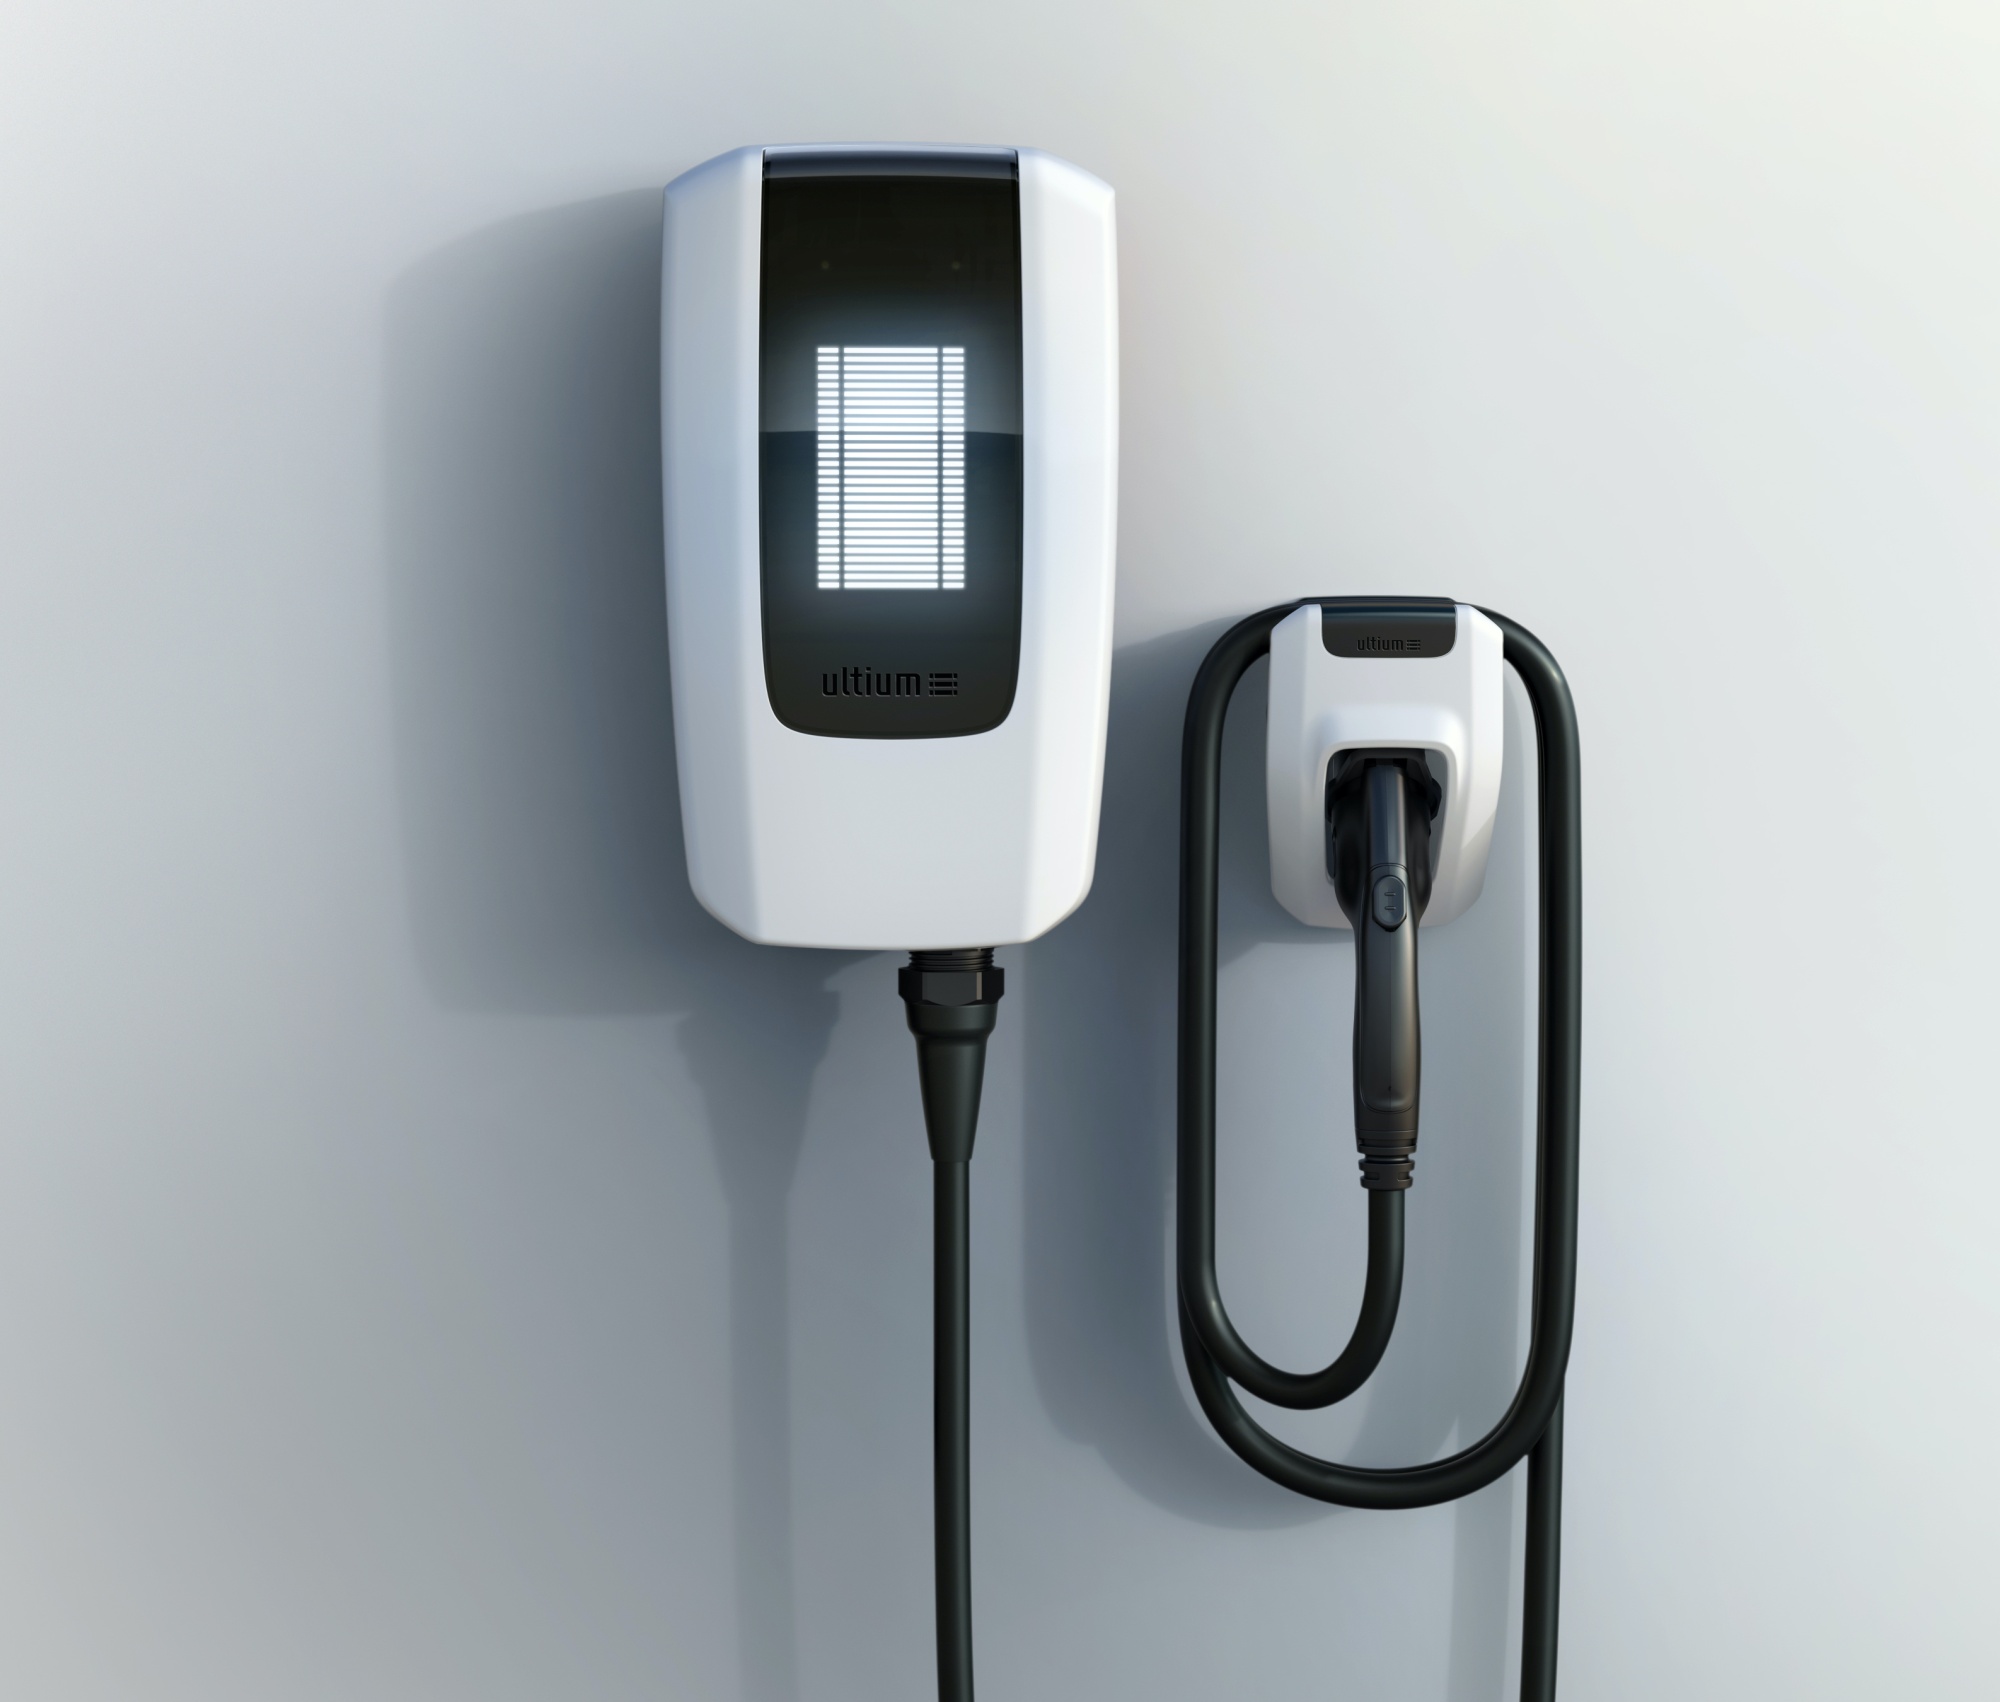 GM to Install 40,000 Public Electric Vehicle Chargers In U.S., Canada